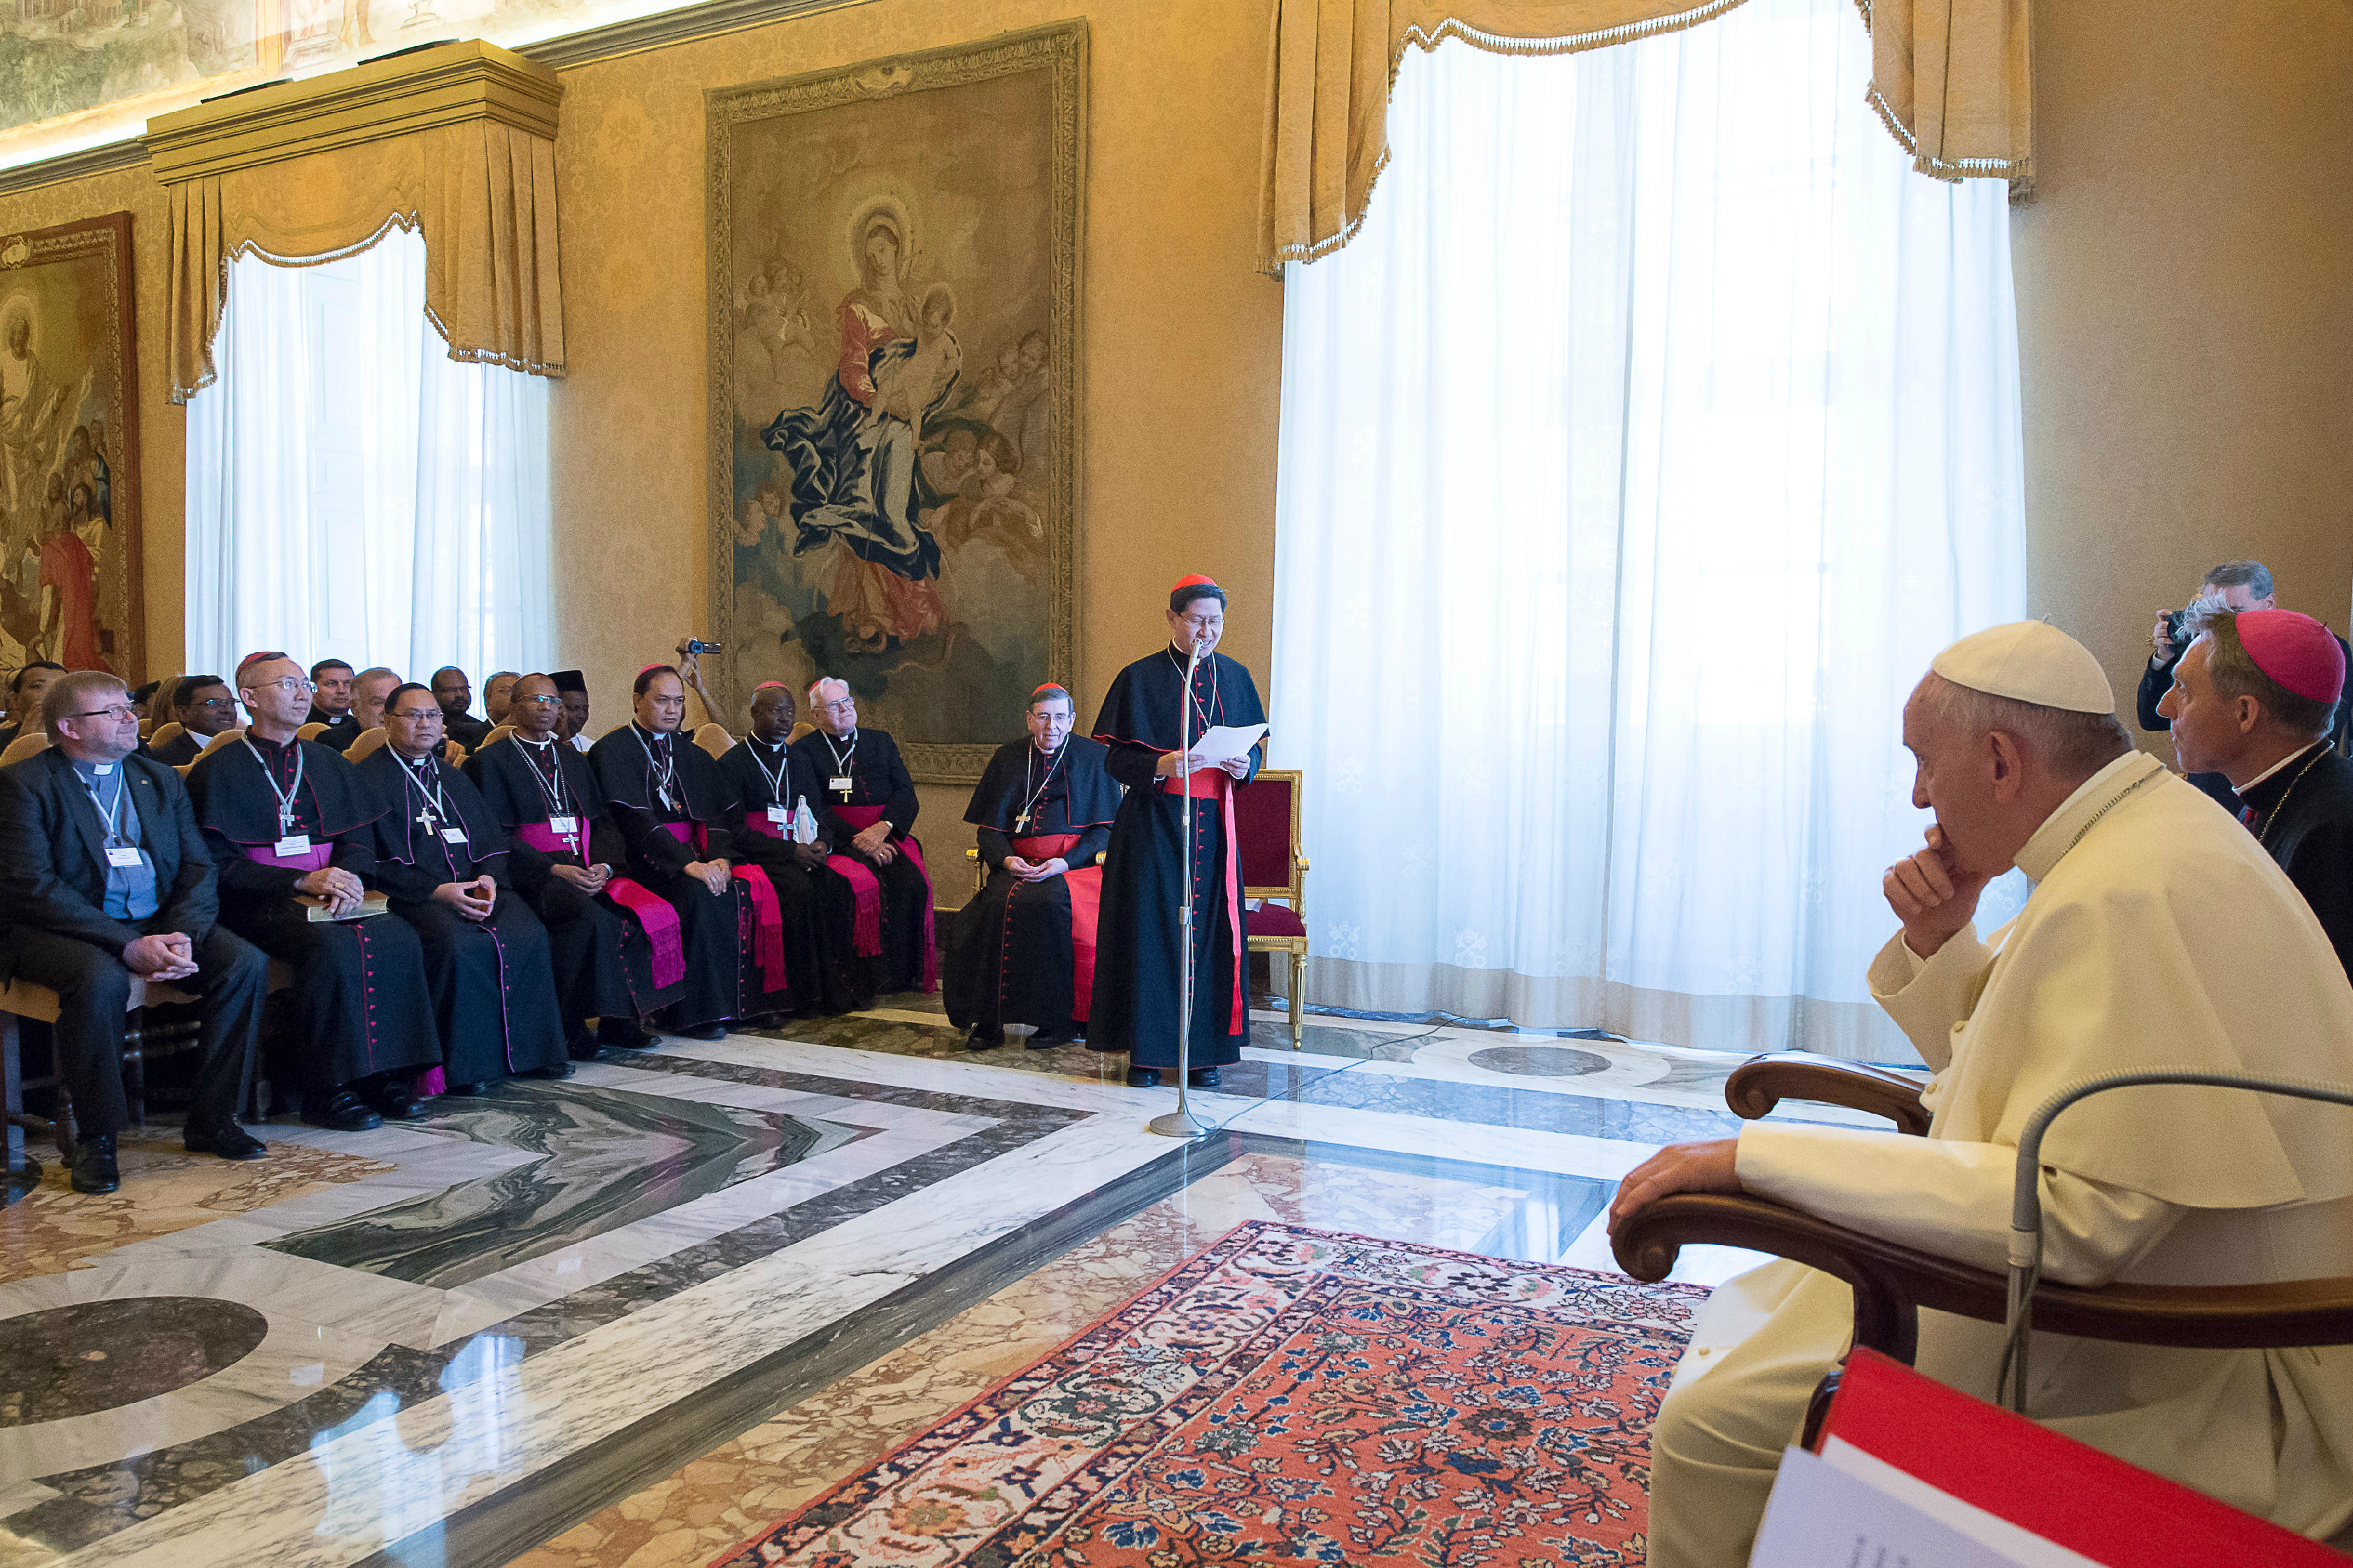 Pope Francis during the audience to the Plenary Assembly of the Catholic Biblical Federation (FEBIC)